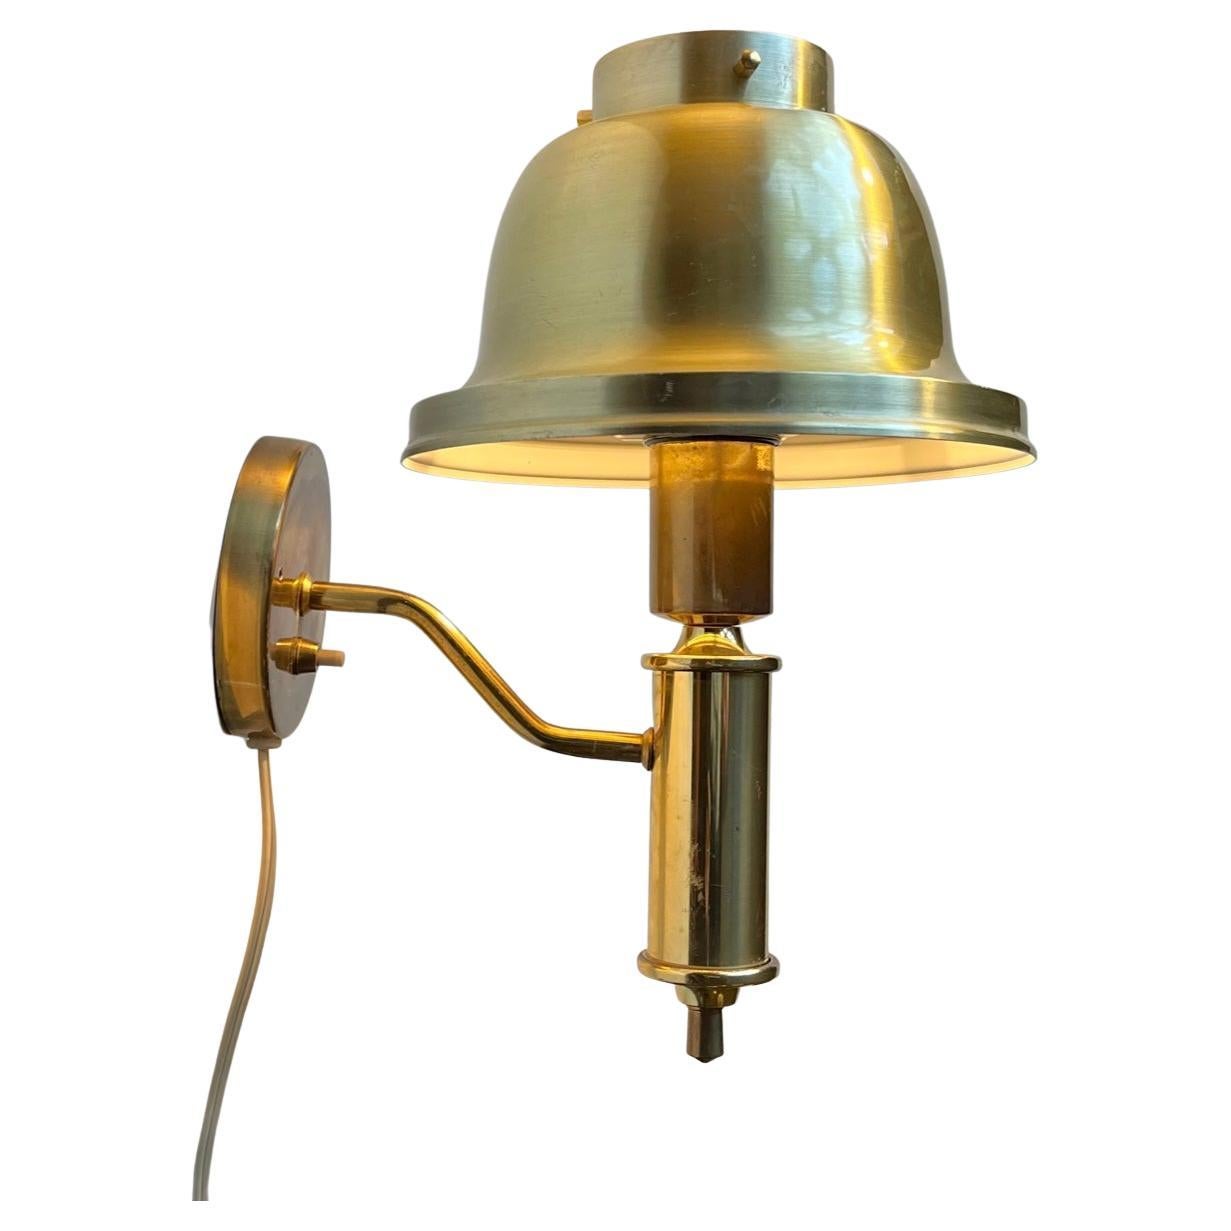 Classical Scandinavian Maritime Brass Wall Sconce from Laoni, 1970s For Sale